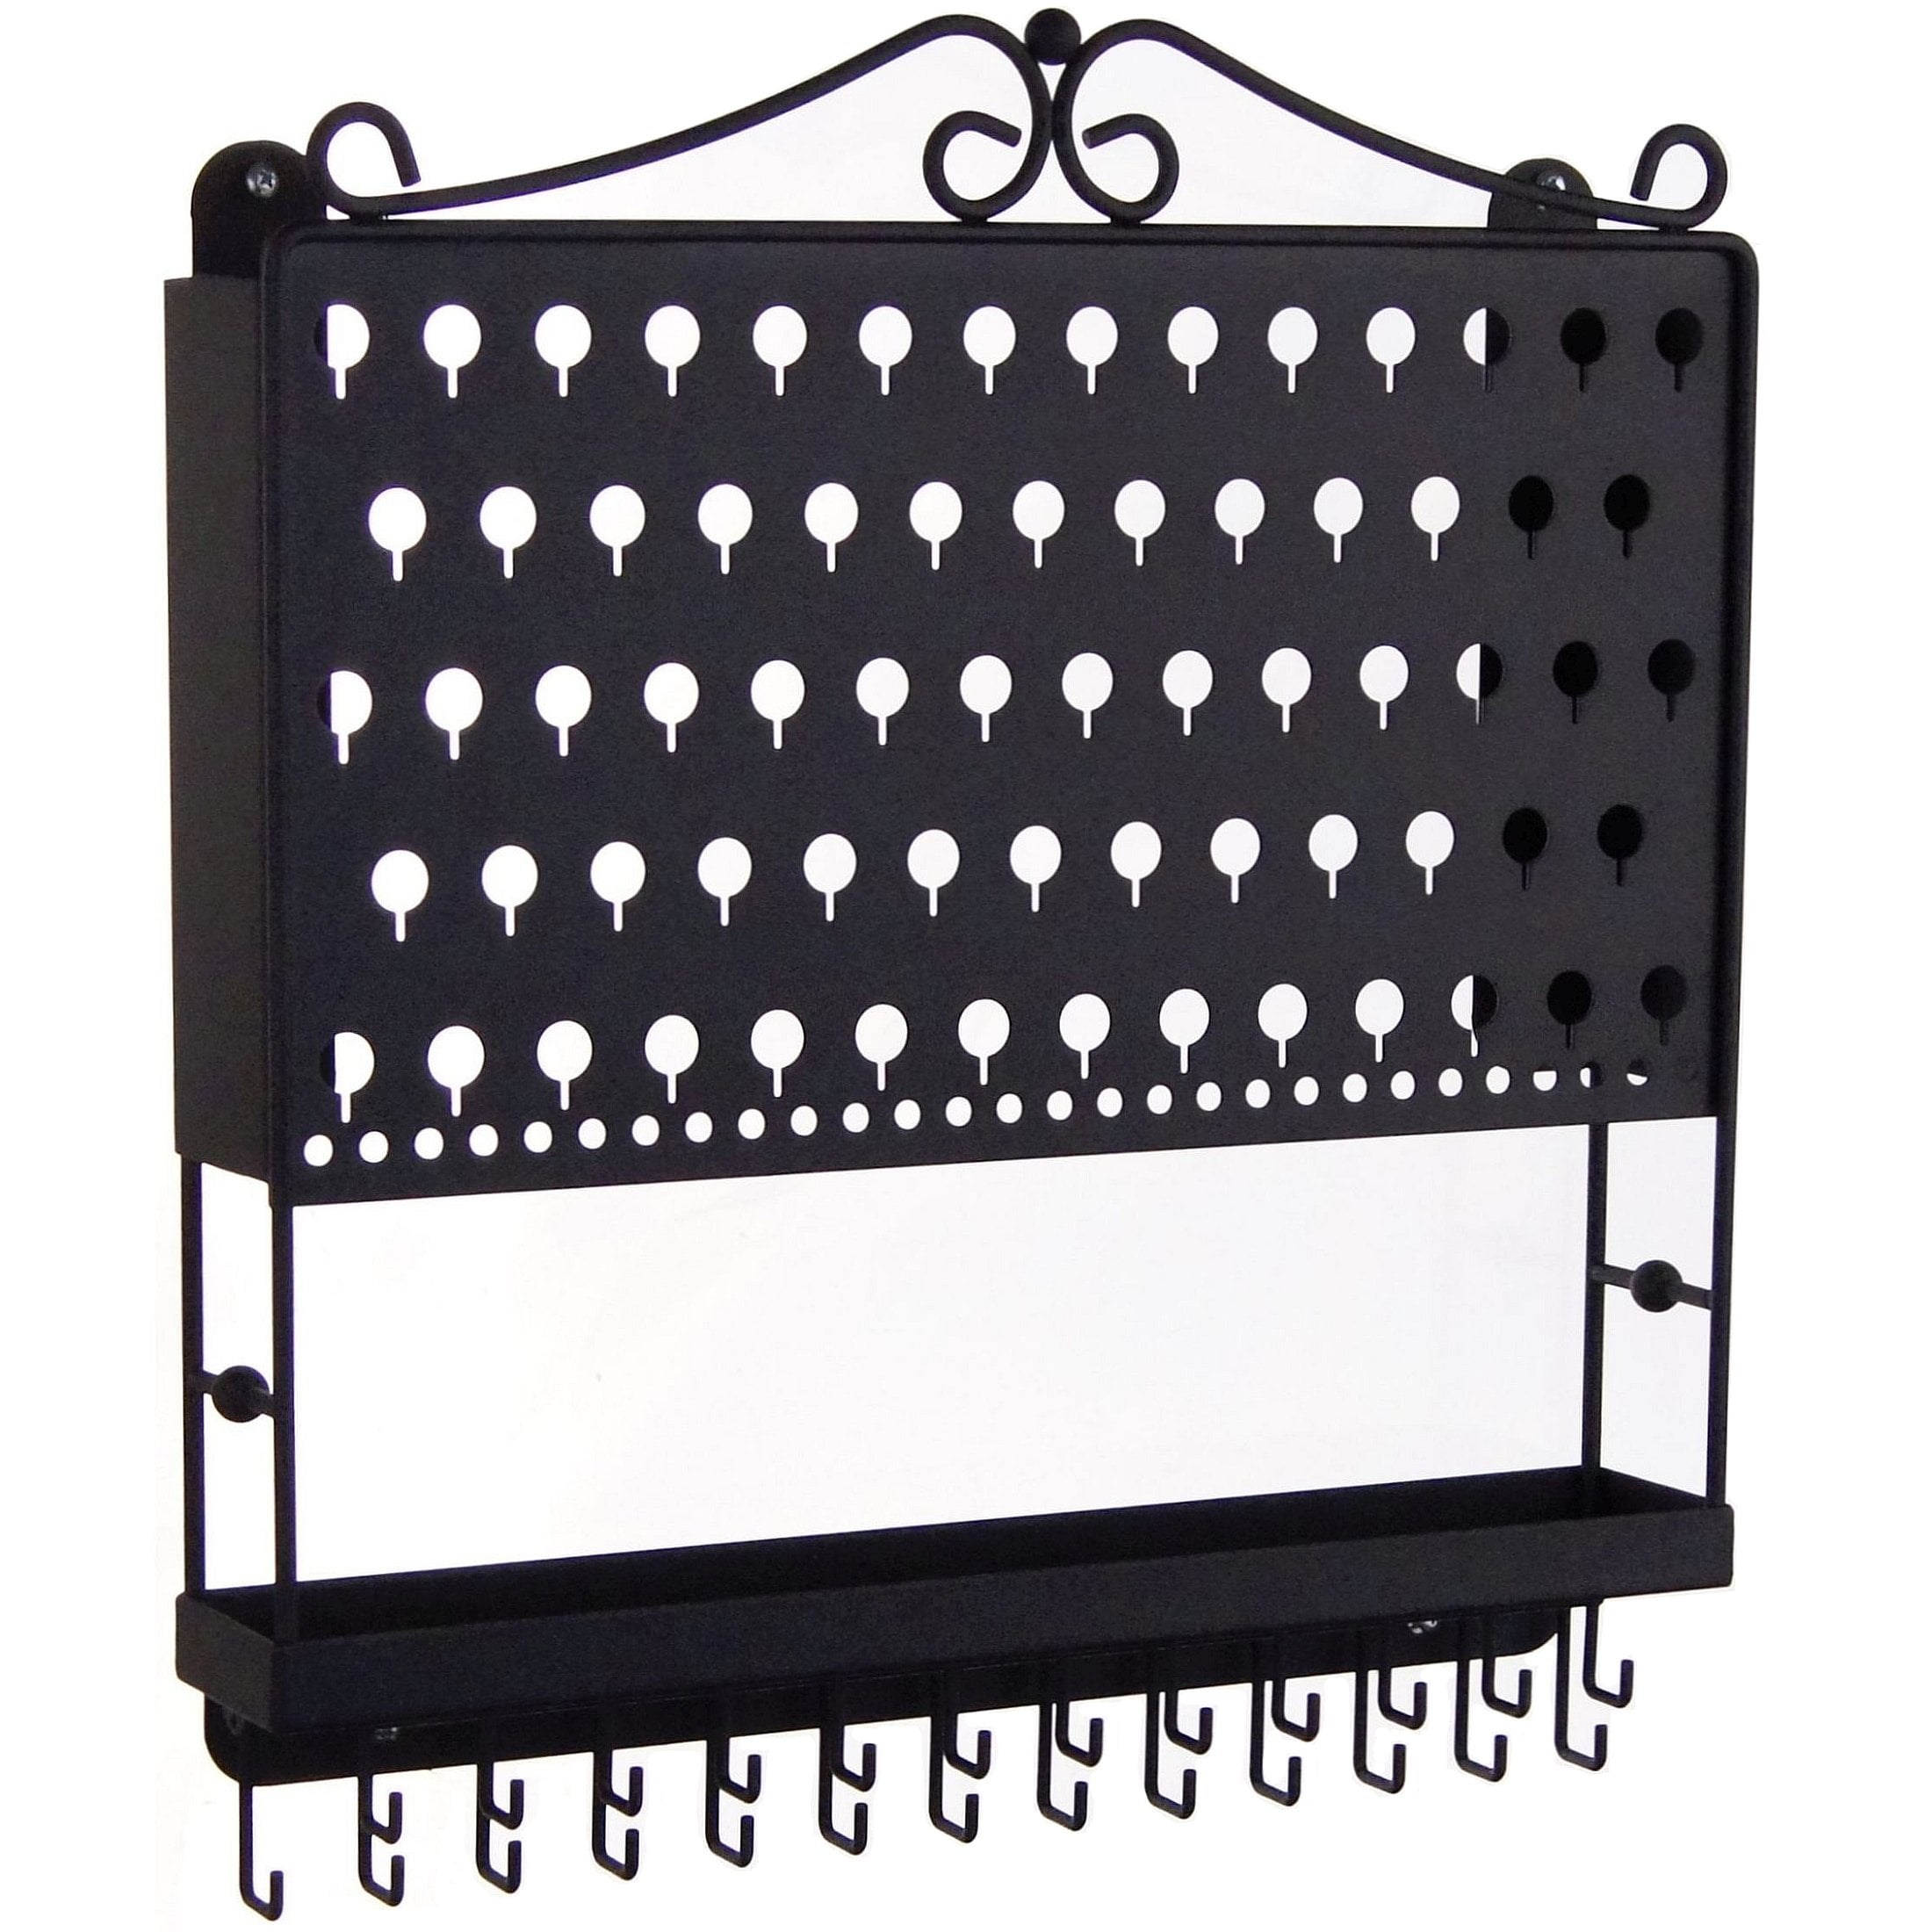 Details about   stainless steel Jewelry Display Organizer for earrings 4 inches black  color 